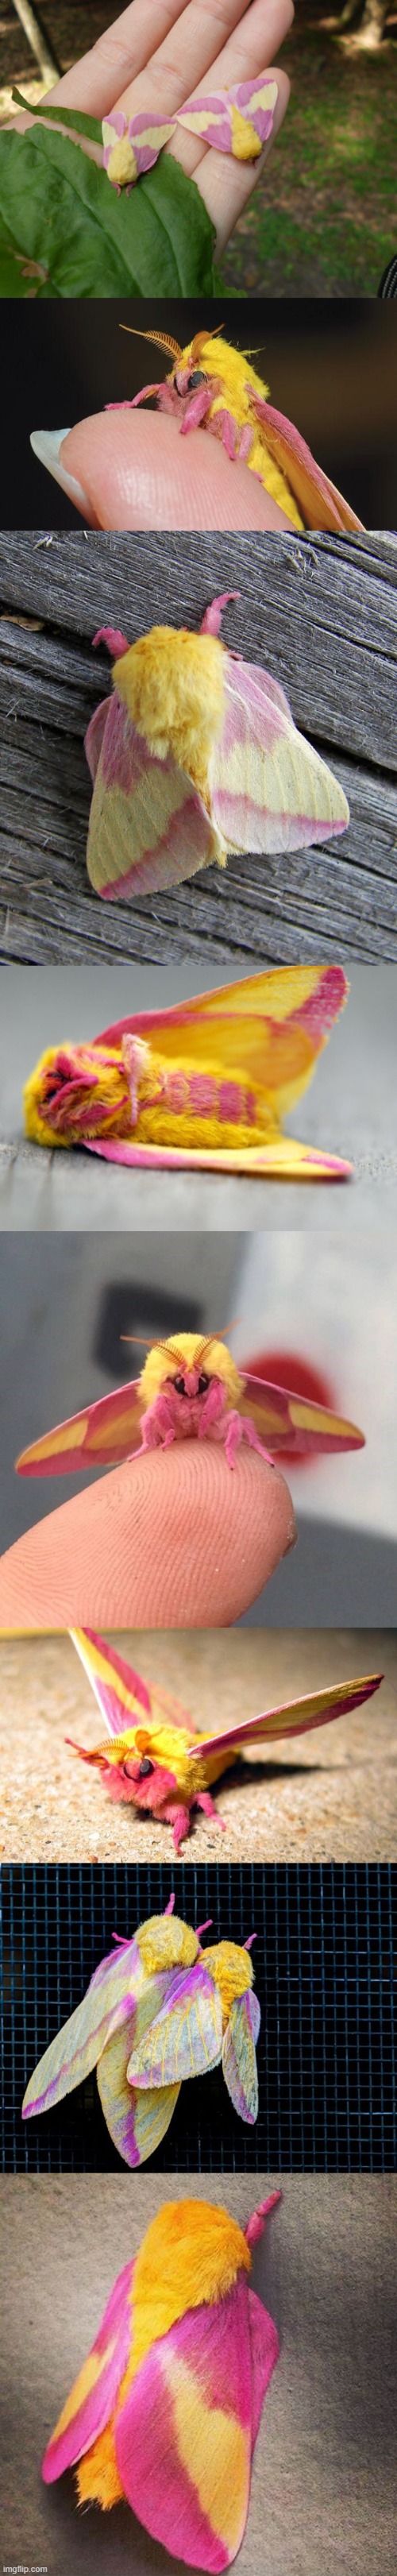 Try not to say "Aww" challenge (Rosy Maple Moths) | image tagged in moths,fluffy,don't say,aww,challenge,cute | made w/ Imgflip meme maker